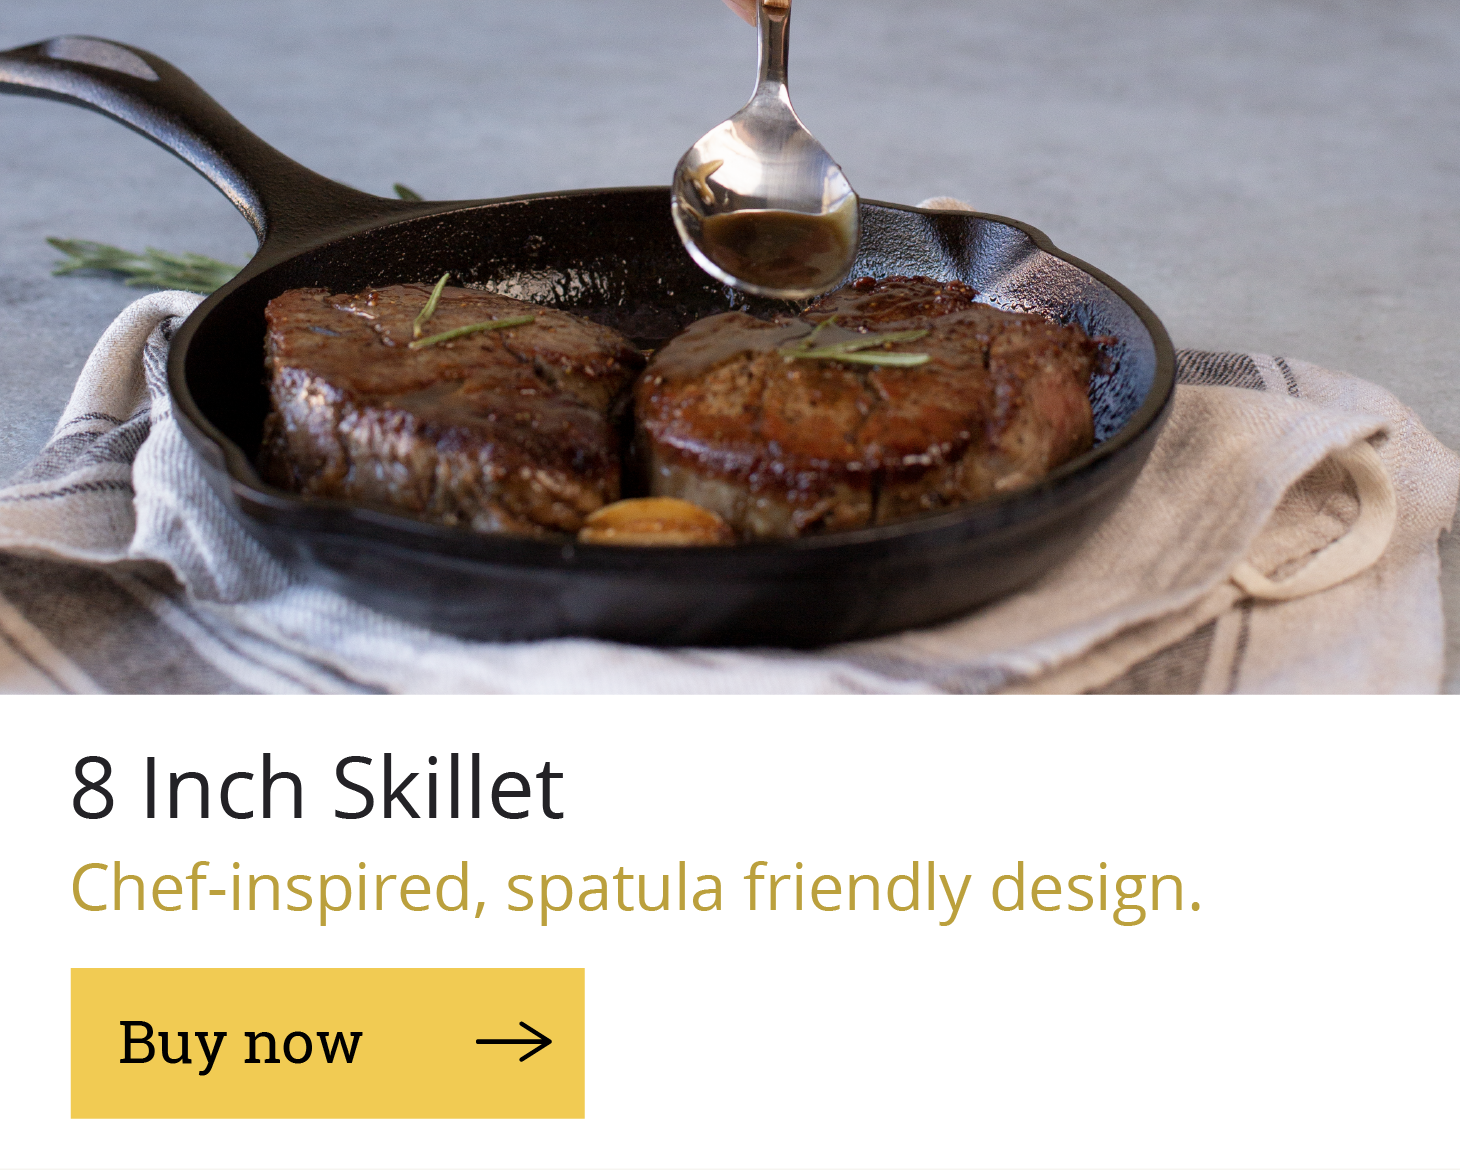 8 Inch Skillet, Chef-inspired, spatula friendly design. [Buy now]